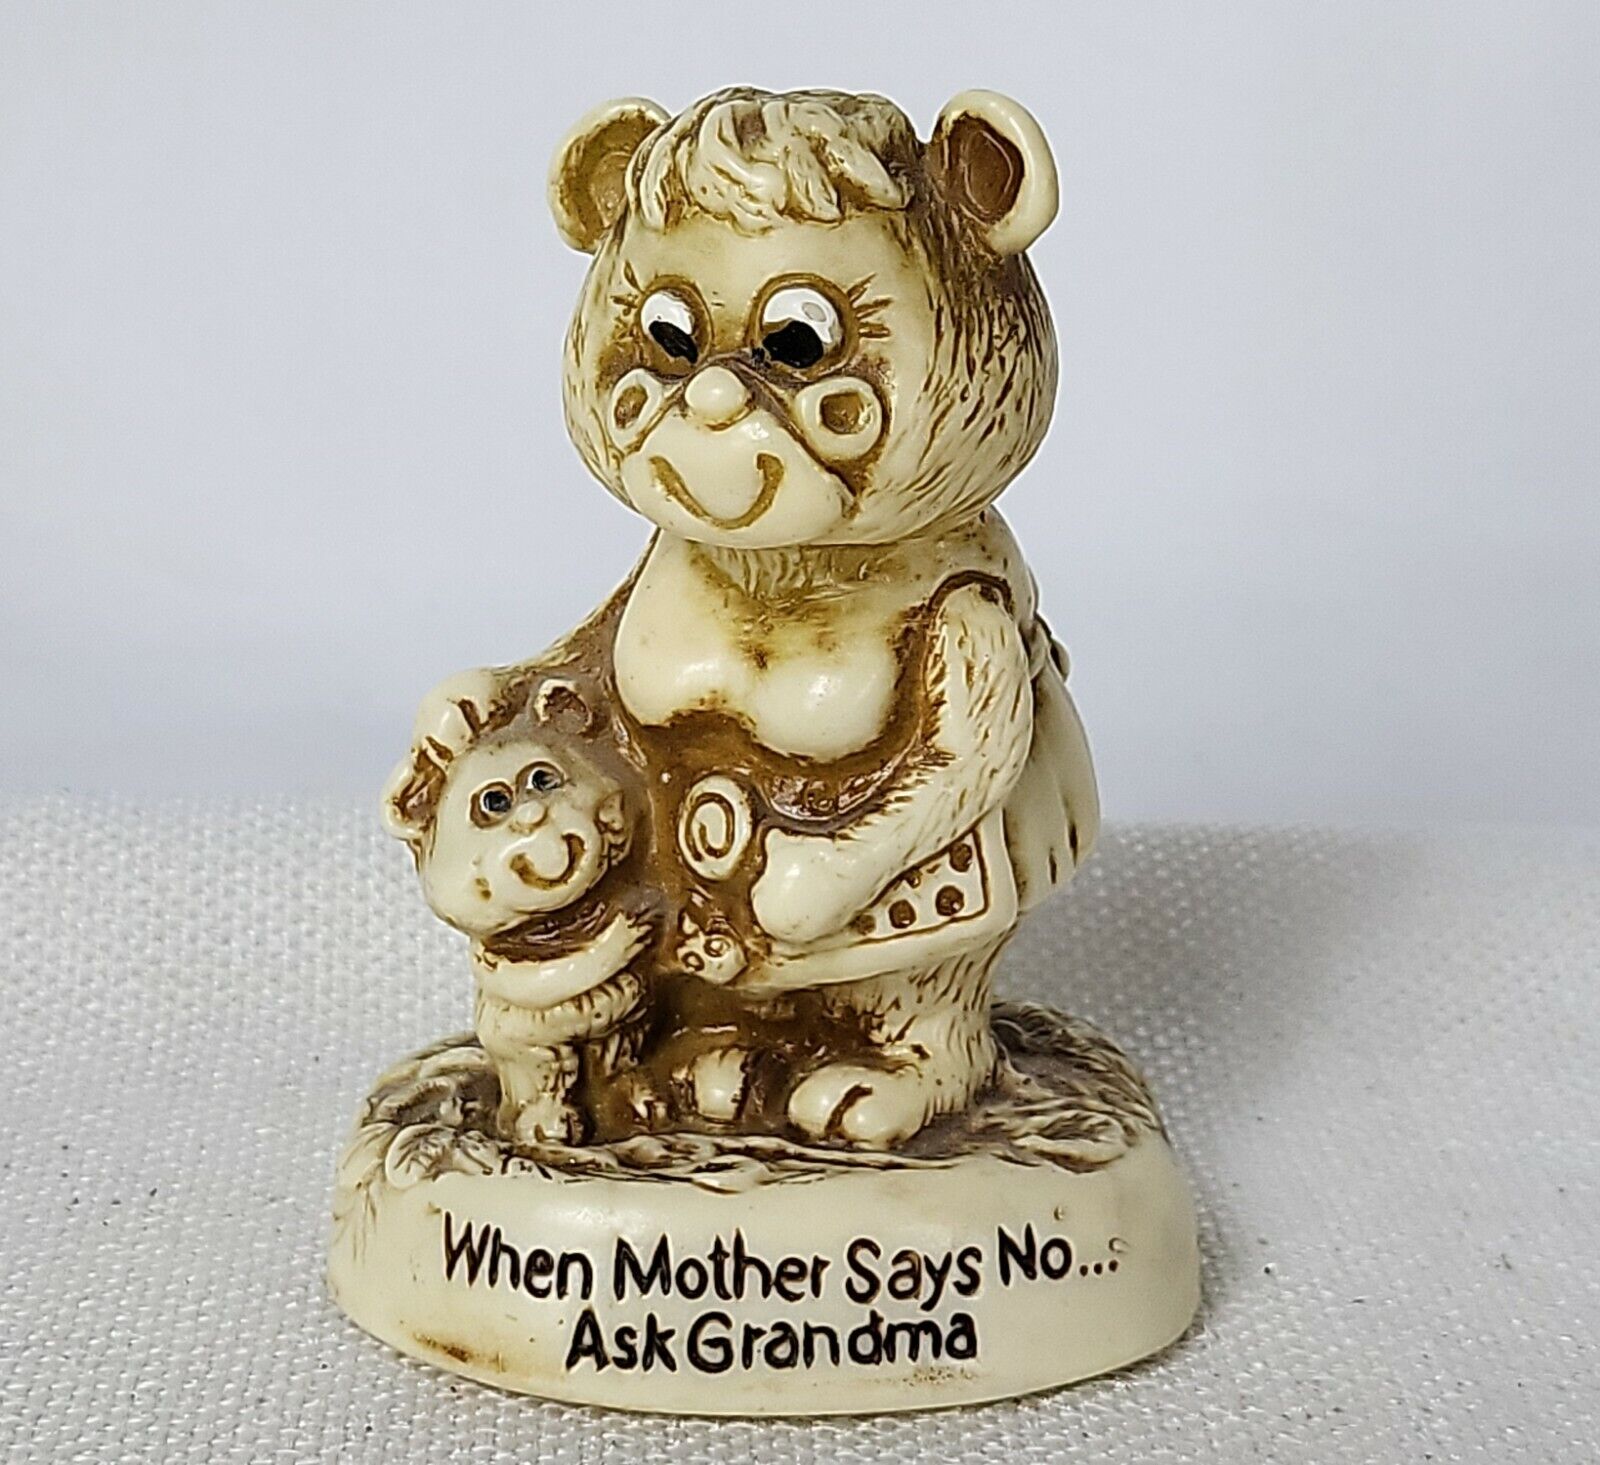 VTG 1976 Russ Berrie & Co. When Mother Says No... Ask Grandma Figurine 23068